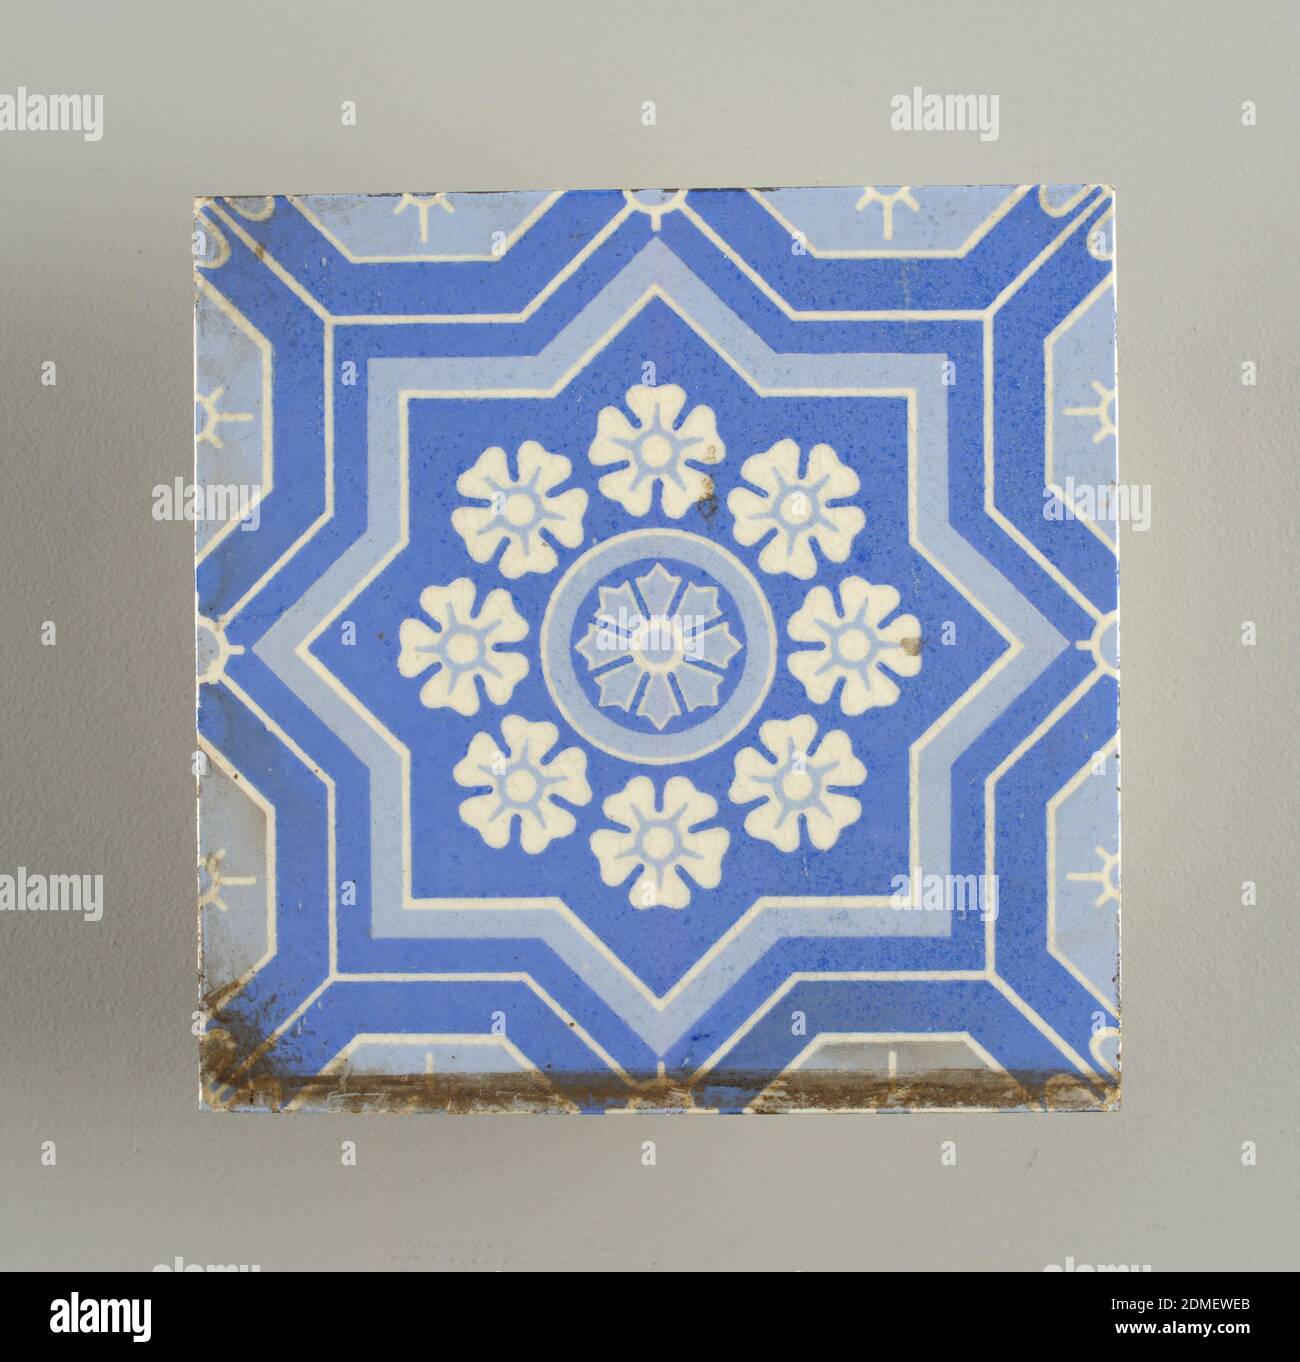 Tile, Stenciled and glazed earthenware, Square tile of white clay, overglaze with stenciled flower inside eight pointed star in two shades of blue., USA, ca. 1900, tiles, Decorative Arts, Tile Stock Photo